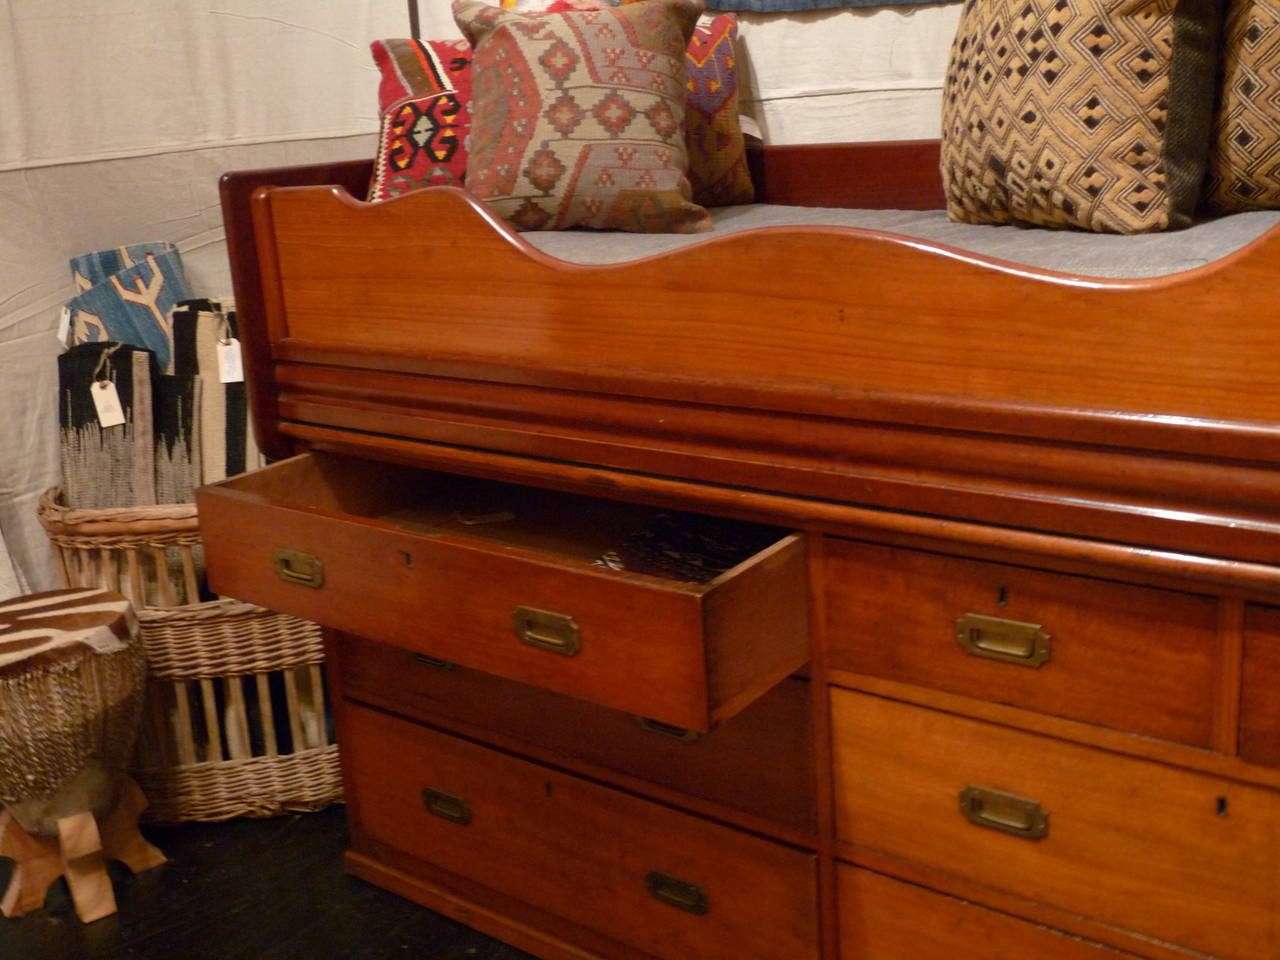 A functional ship's cabin bed is pre-Titanic and large enough to be used in a guest room, children's room or even modified into a serving piece.  It is crafted from teak and mahogany and has brass accents. A Stunning piece with beautiful lines and